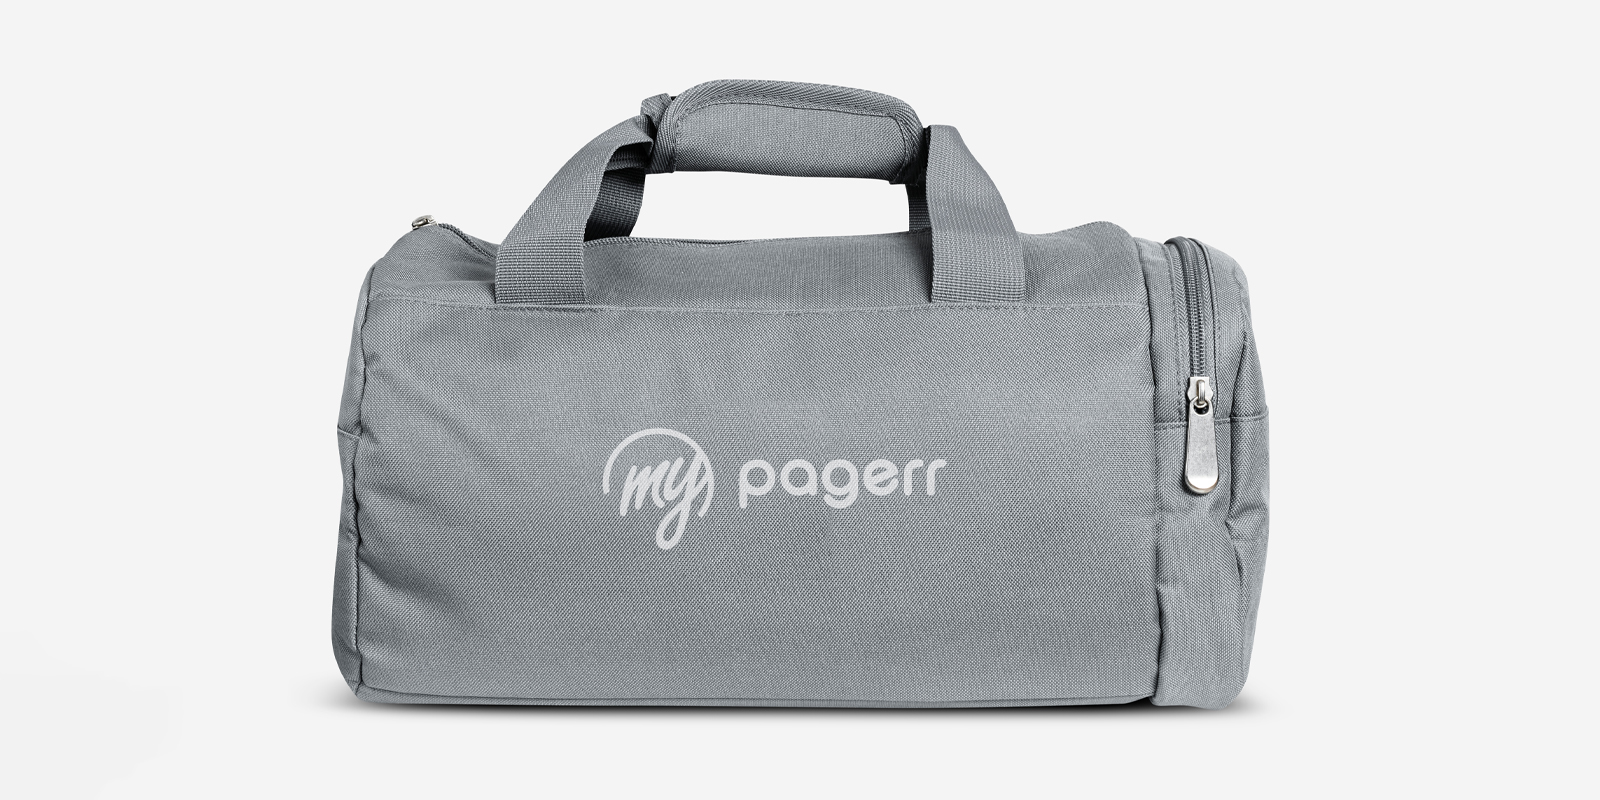 Duffel & gym bags in Tallinn - Print with Pagerr